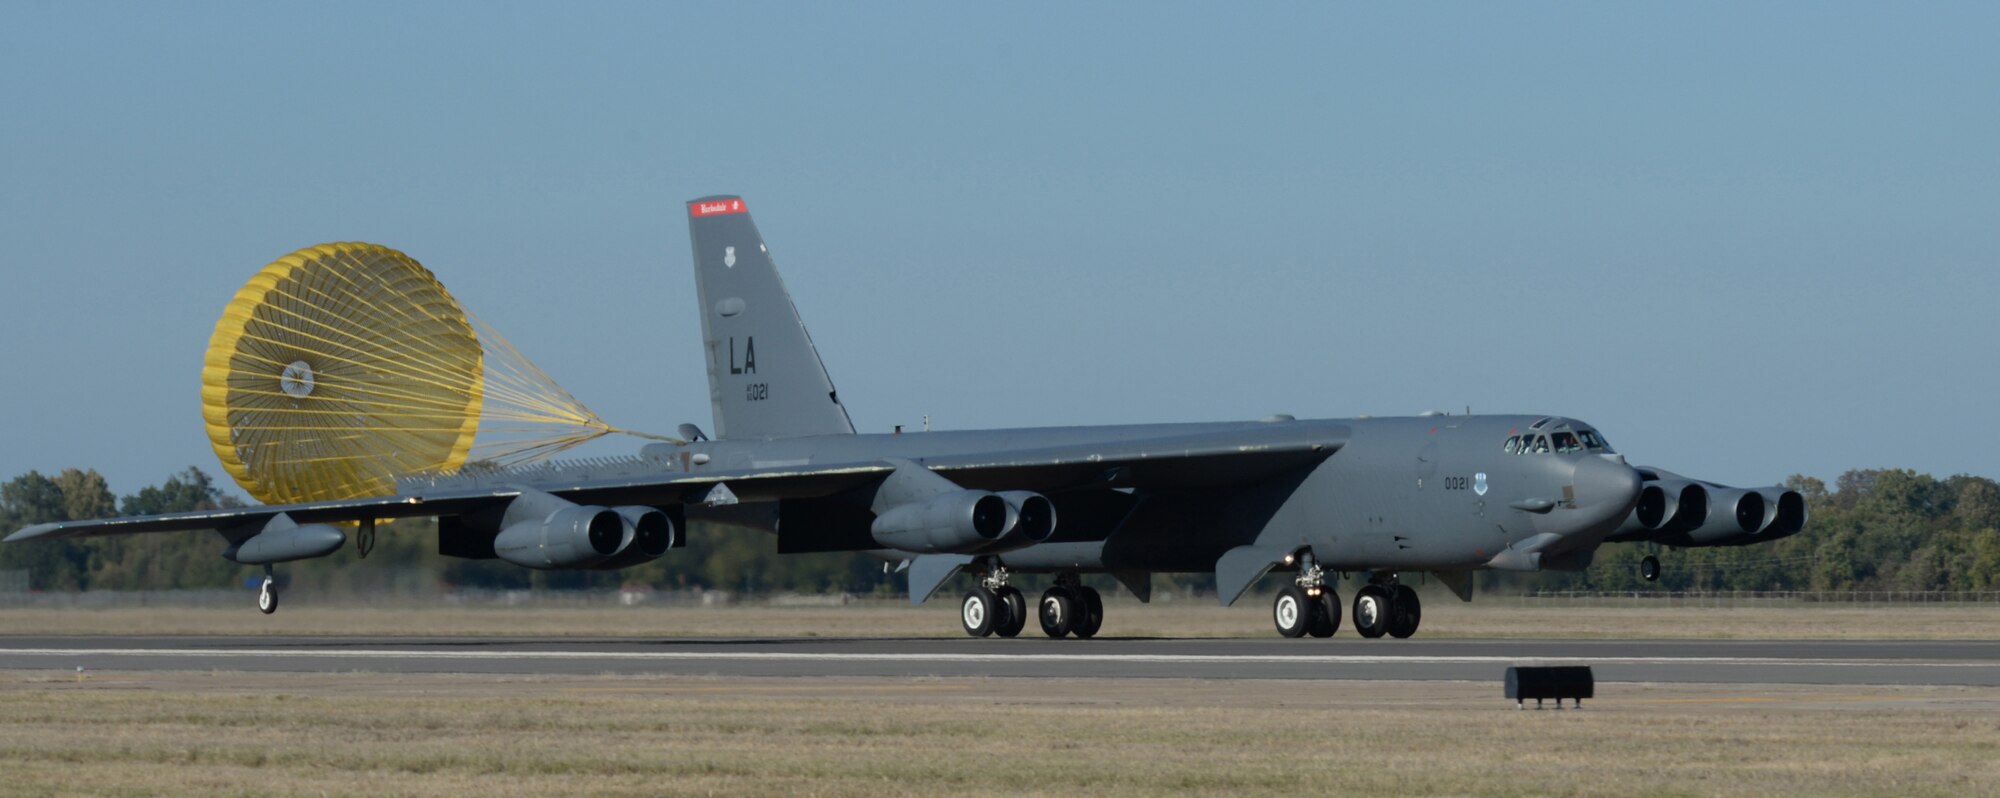 A B-52H Stratofortress lands during Global Thunder 15 on Oct. 26, 2014, at Barksdale Air Force Base, La. Global Thunder is a U.S. Strategic Command annual field training and battle staff exercise designed to exercise all mission areas with primary emphasis on nuclear command, control and communications. This exercise provides training opportunities for components, task forces, units, and command posts to deter, and if necessary, defeat a military attack against the United States and to employ forces as directed by the president. (U.S. Air Force photo/Airman 1st Class Curt Beach)